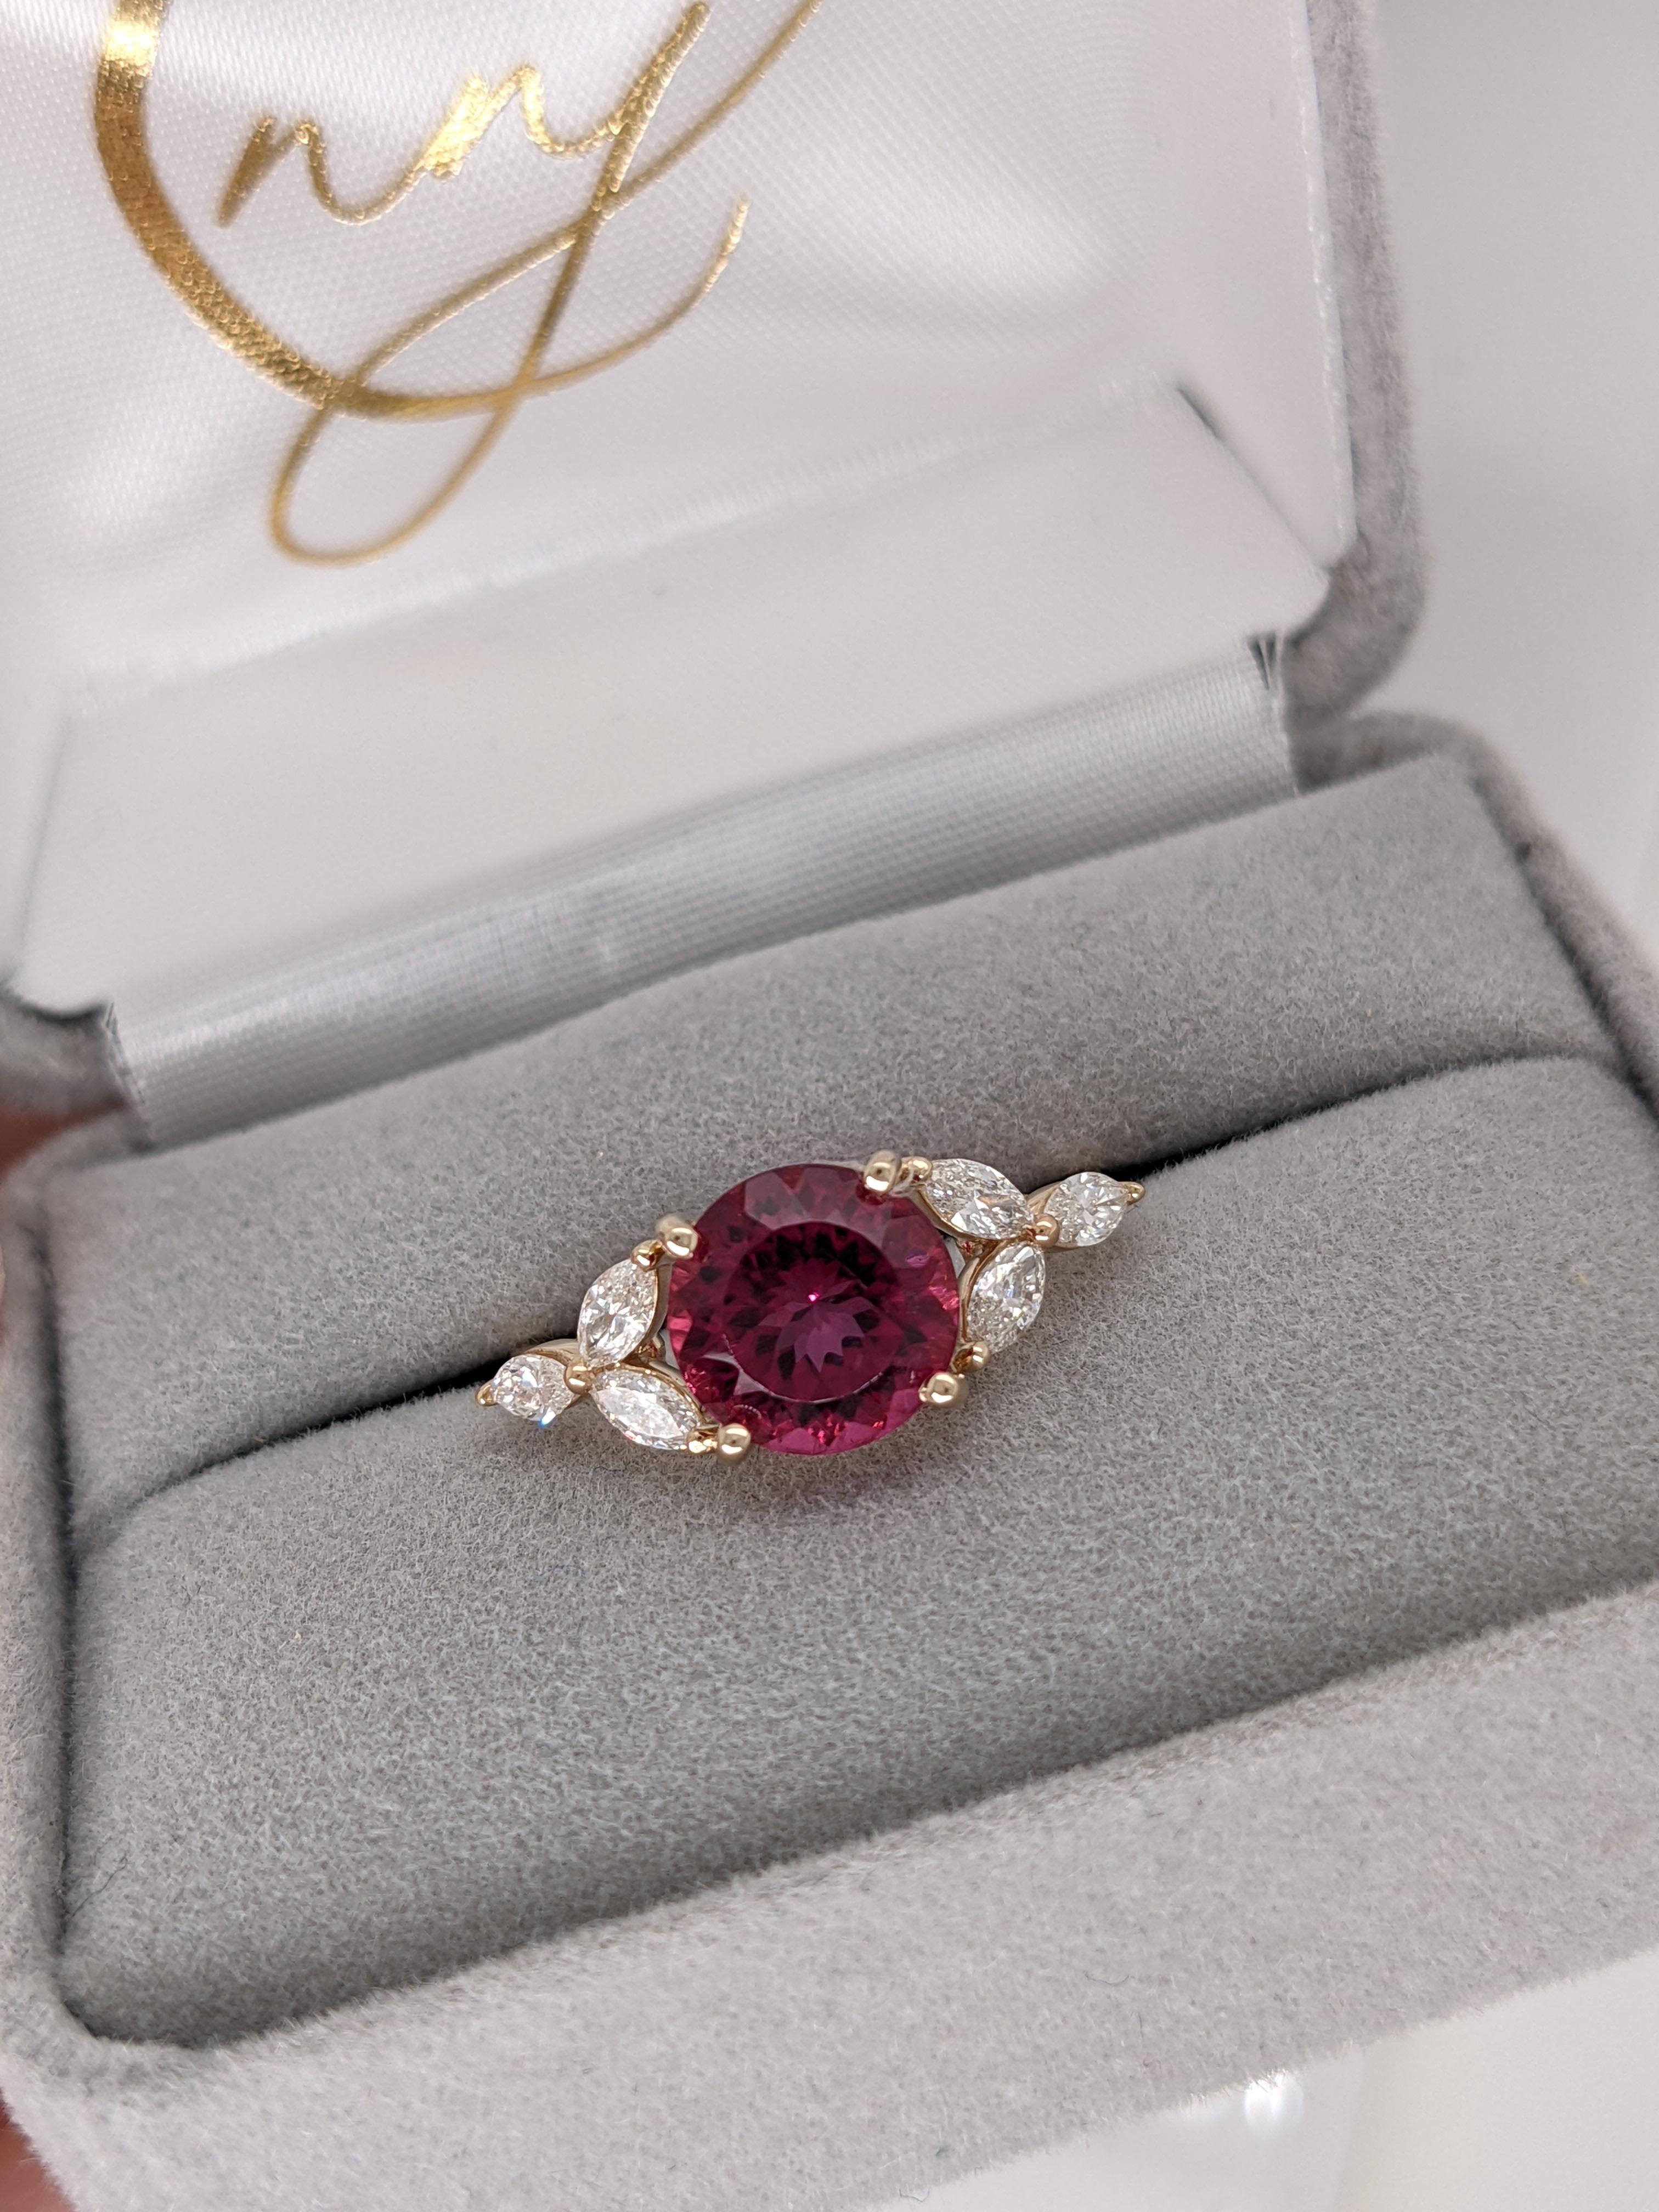 Women's 2.25 carat Rubellite Tourmaline in 14k Yellow Gold w Diamond Accents Round 8mm For Sale